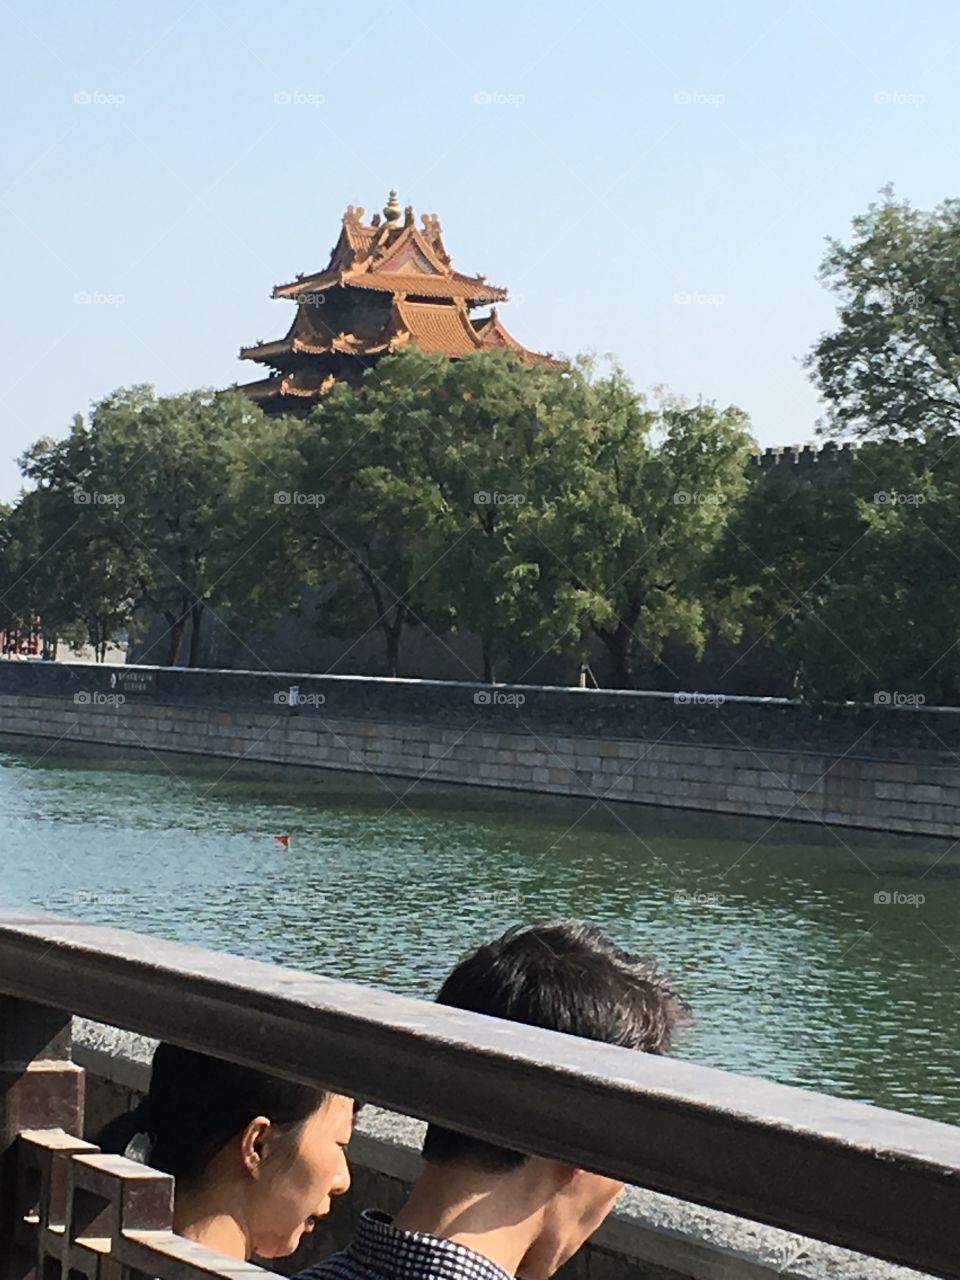 View from the boat at the emperor’s summer palace in Beijing, China